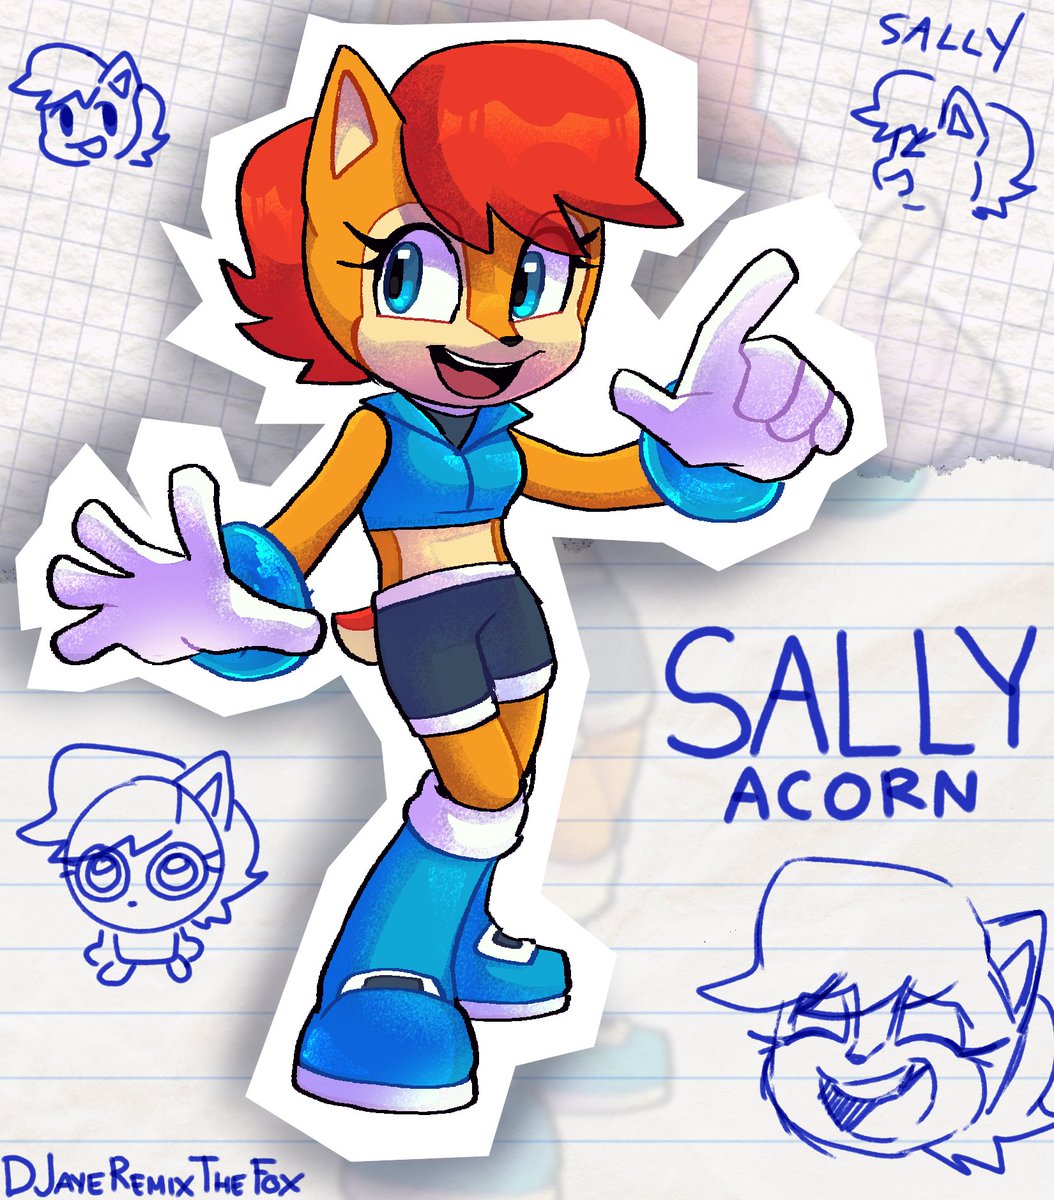 Really missed drawing sonic characters so here's Sally Acorn!!! #sonicfanart #sallyacorn